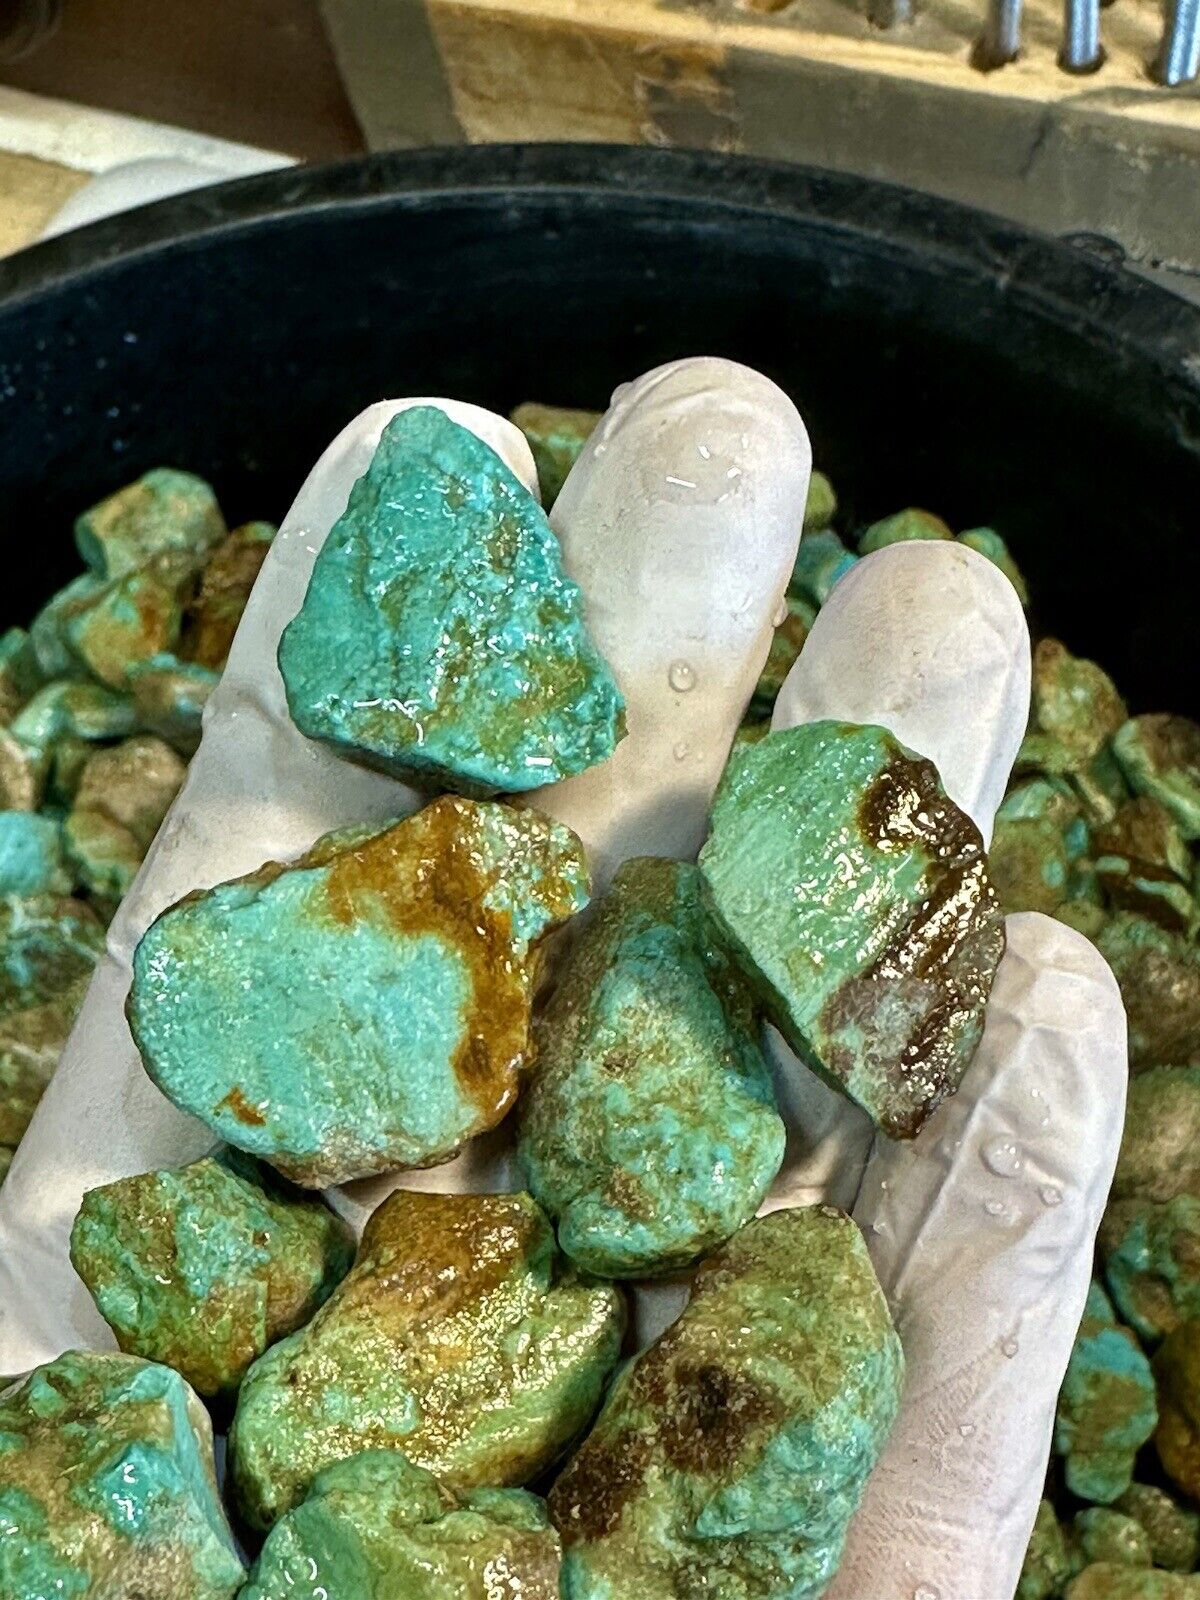 SPECIAL: Quality Kaolin Turquoise Nugs. 1 LB of Beautiful High Blues.